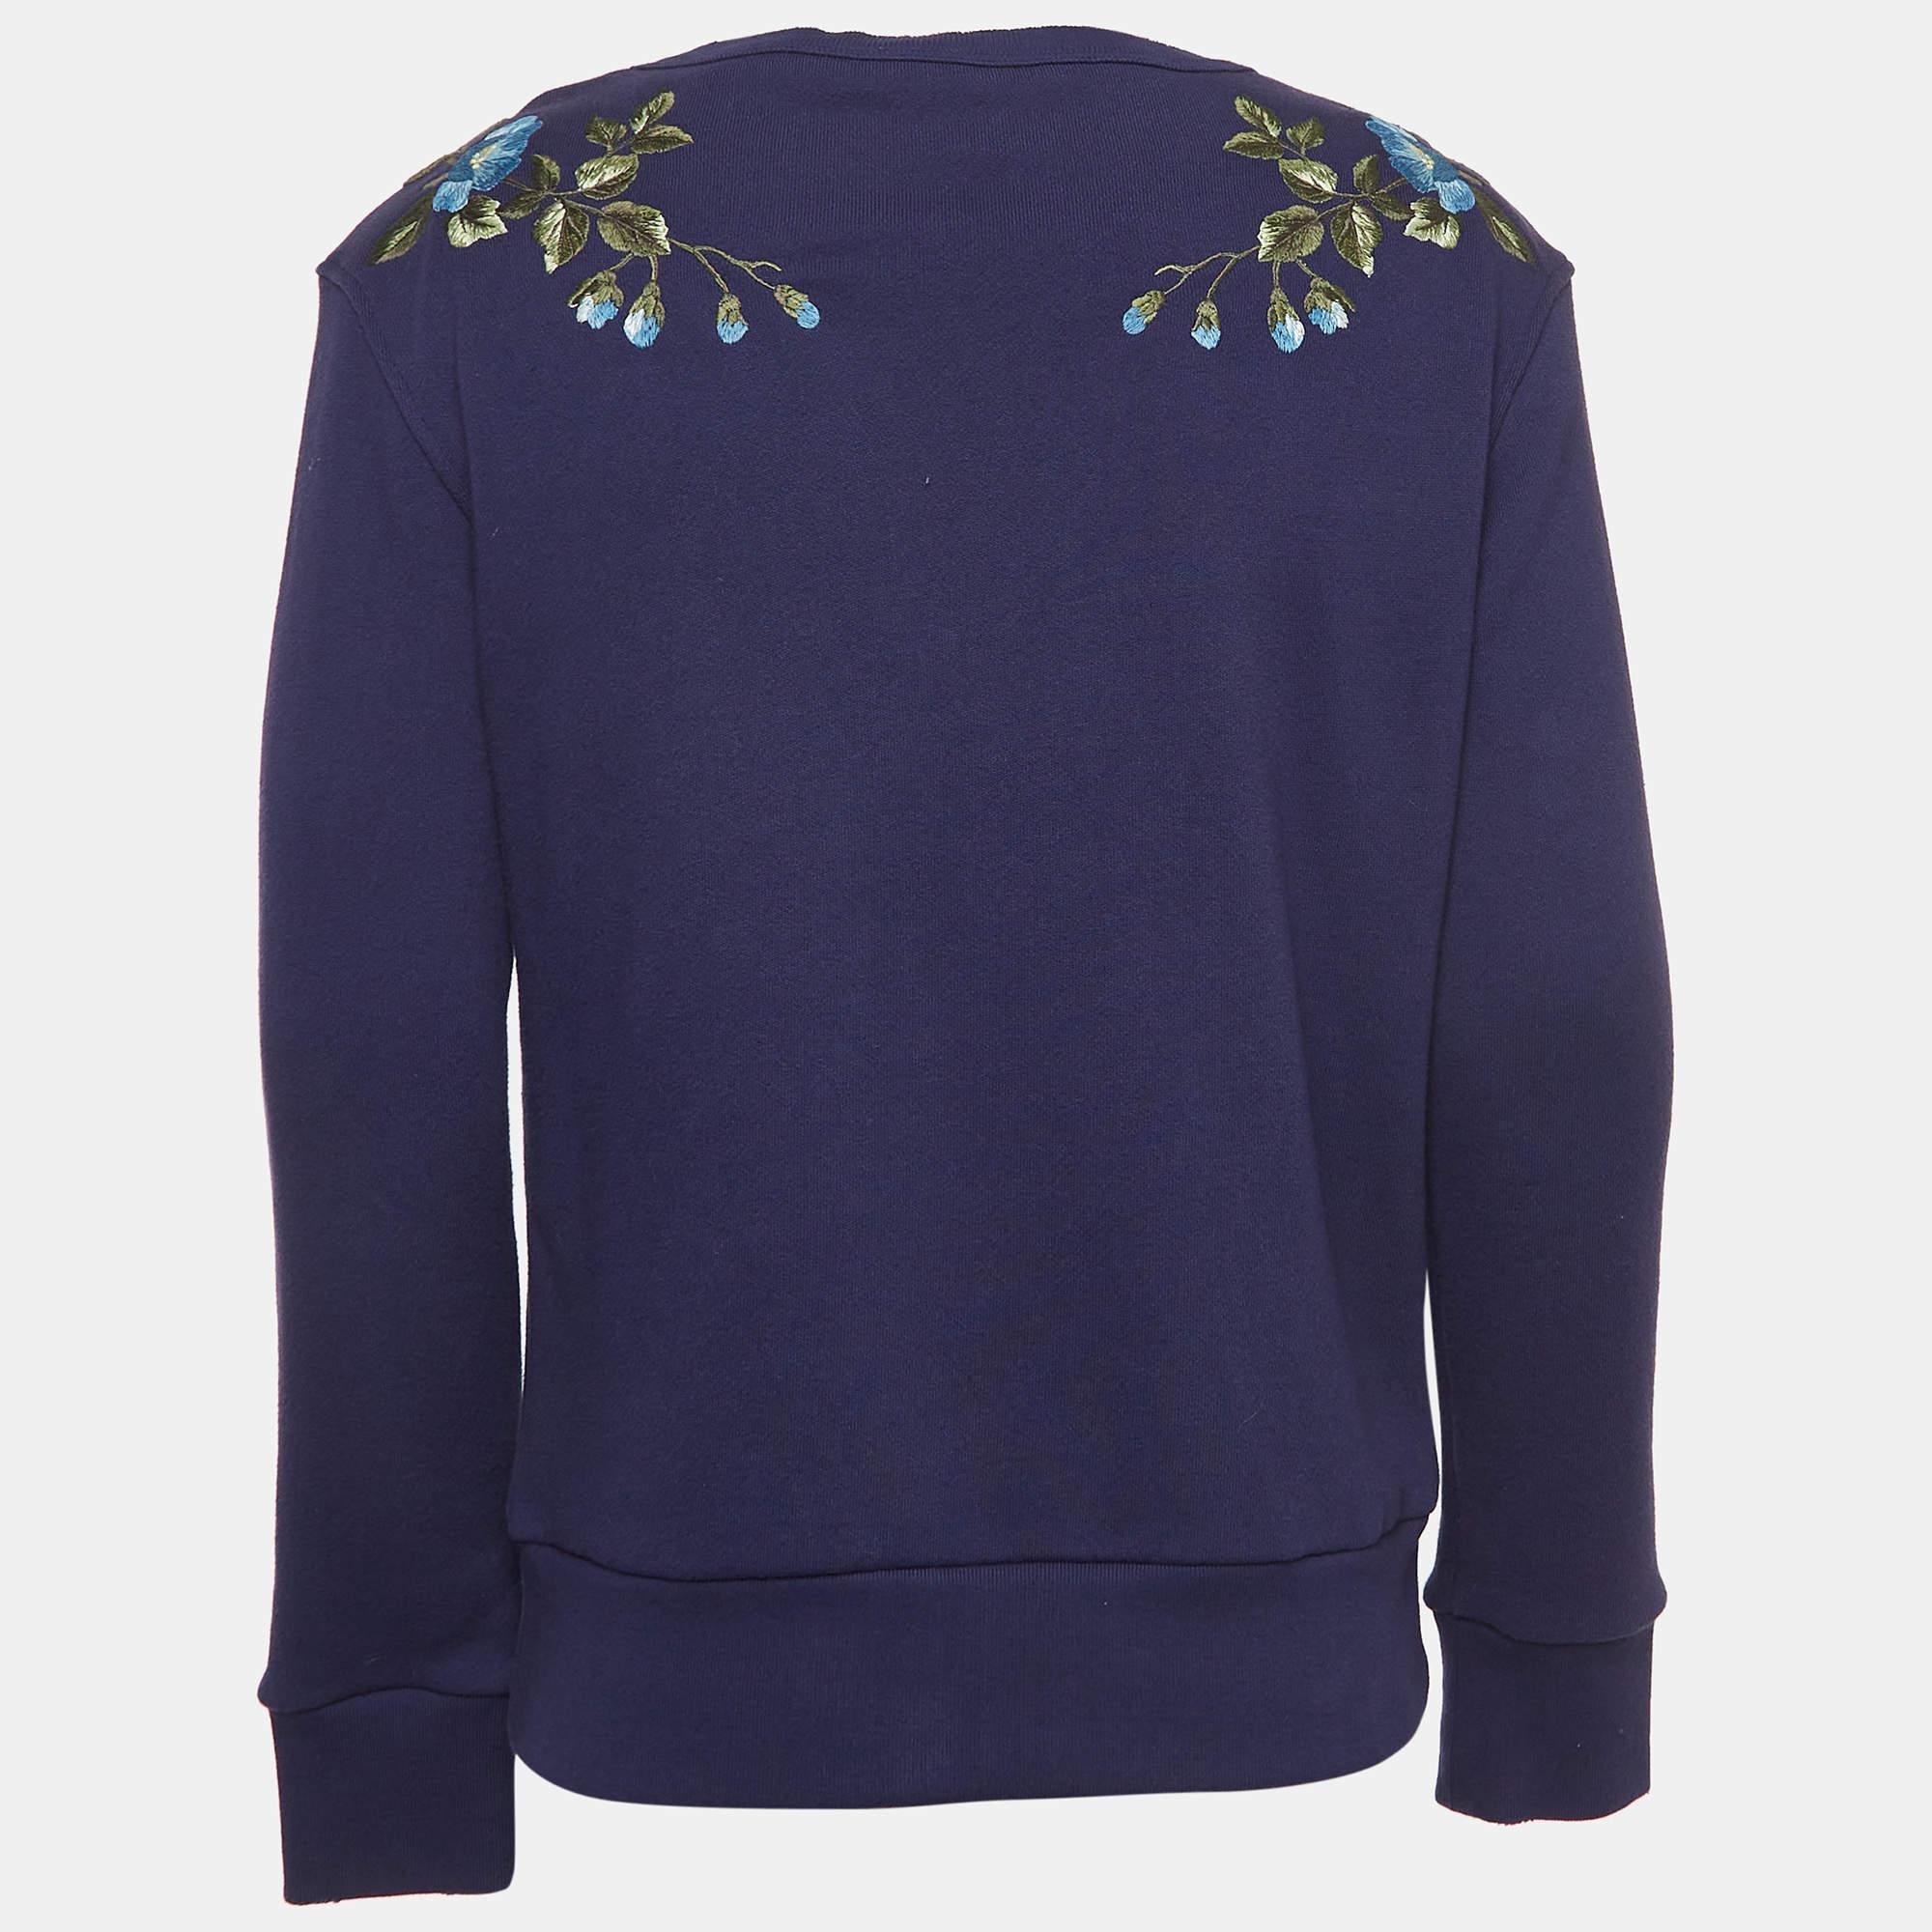 Sweatshirts like this are the best pick on days you want to dress comfortably. Made from quality fabrics, this sweatshirt is enhanced with a classy hue, attractive designs, and a cozy fit.

